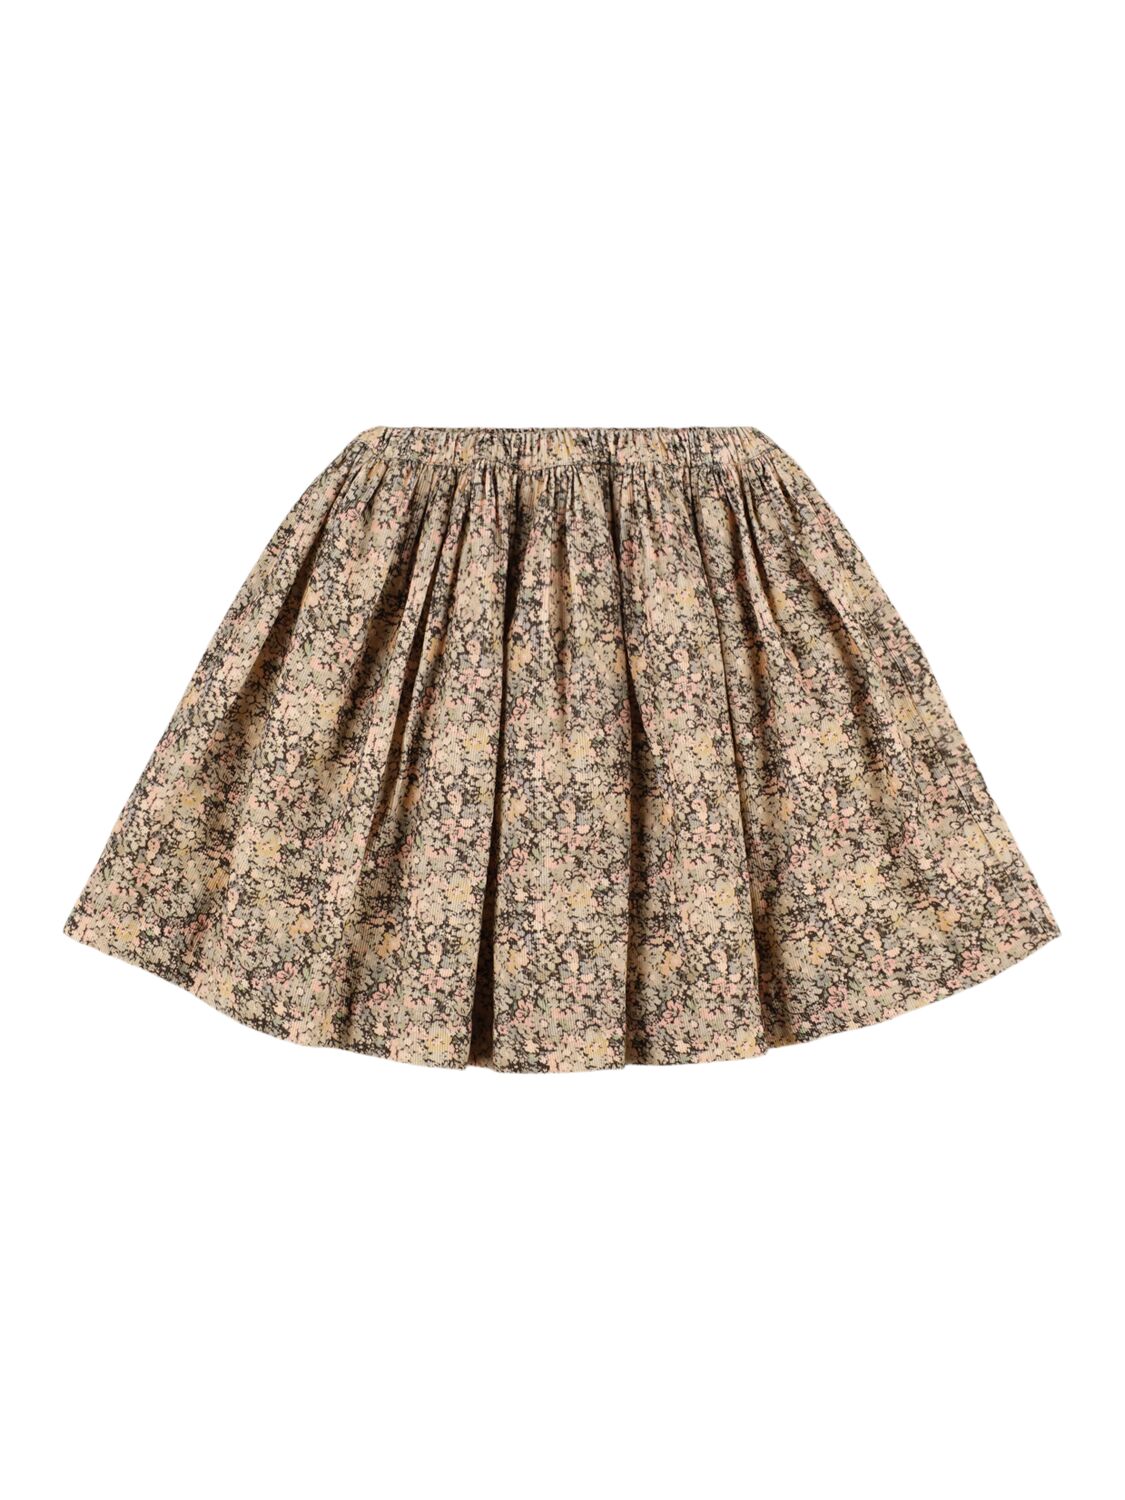 Bonpoint Kids' Printed Cotton Pleated Skirt In Brown